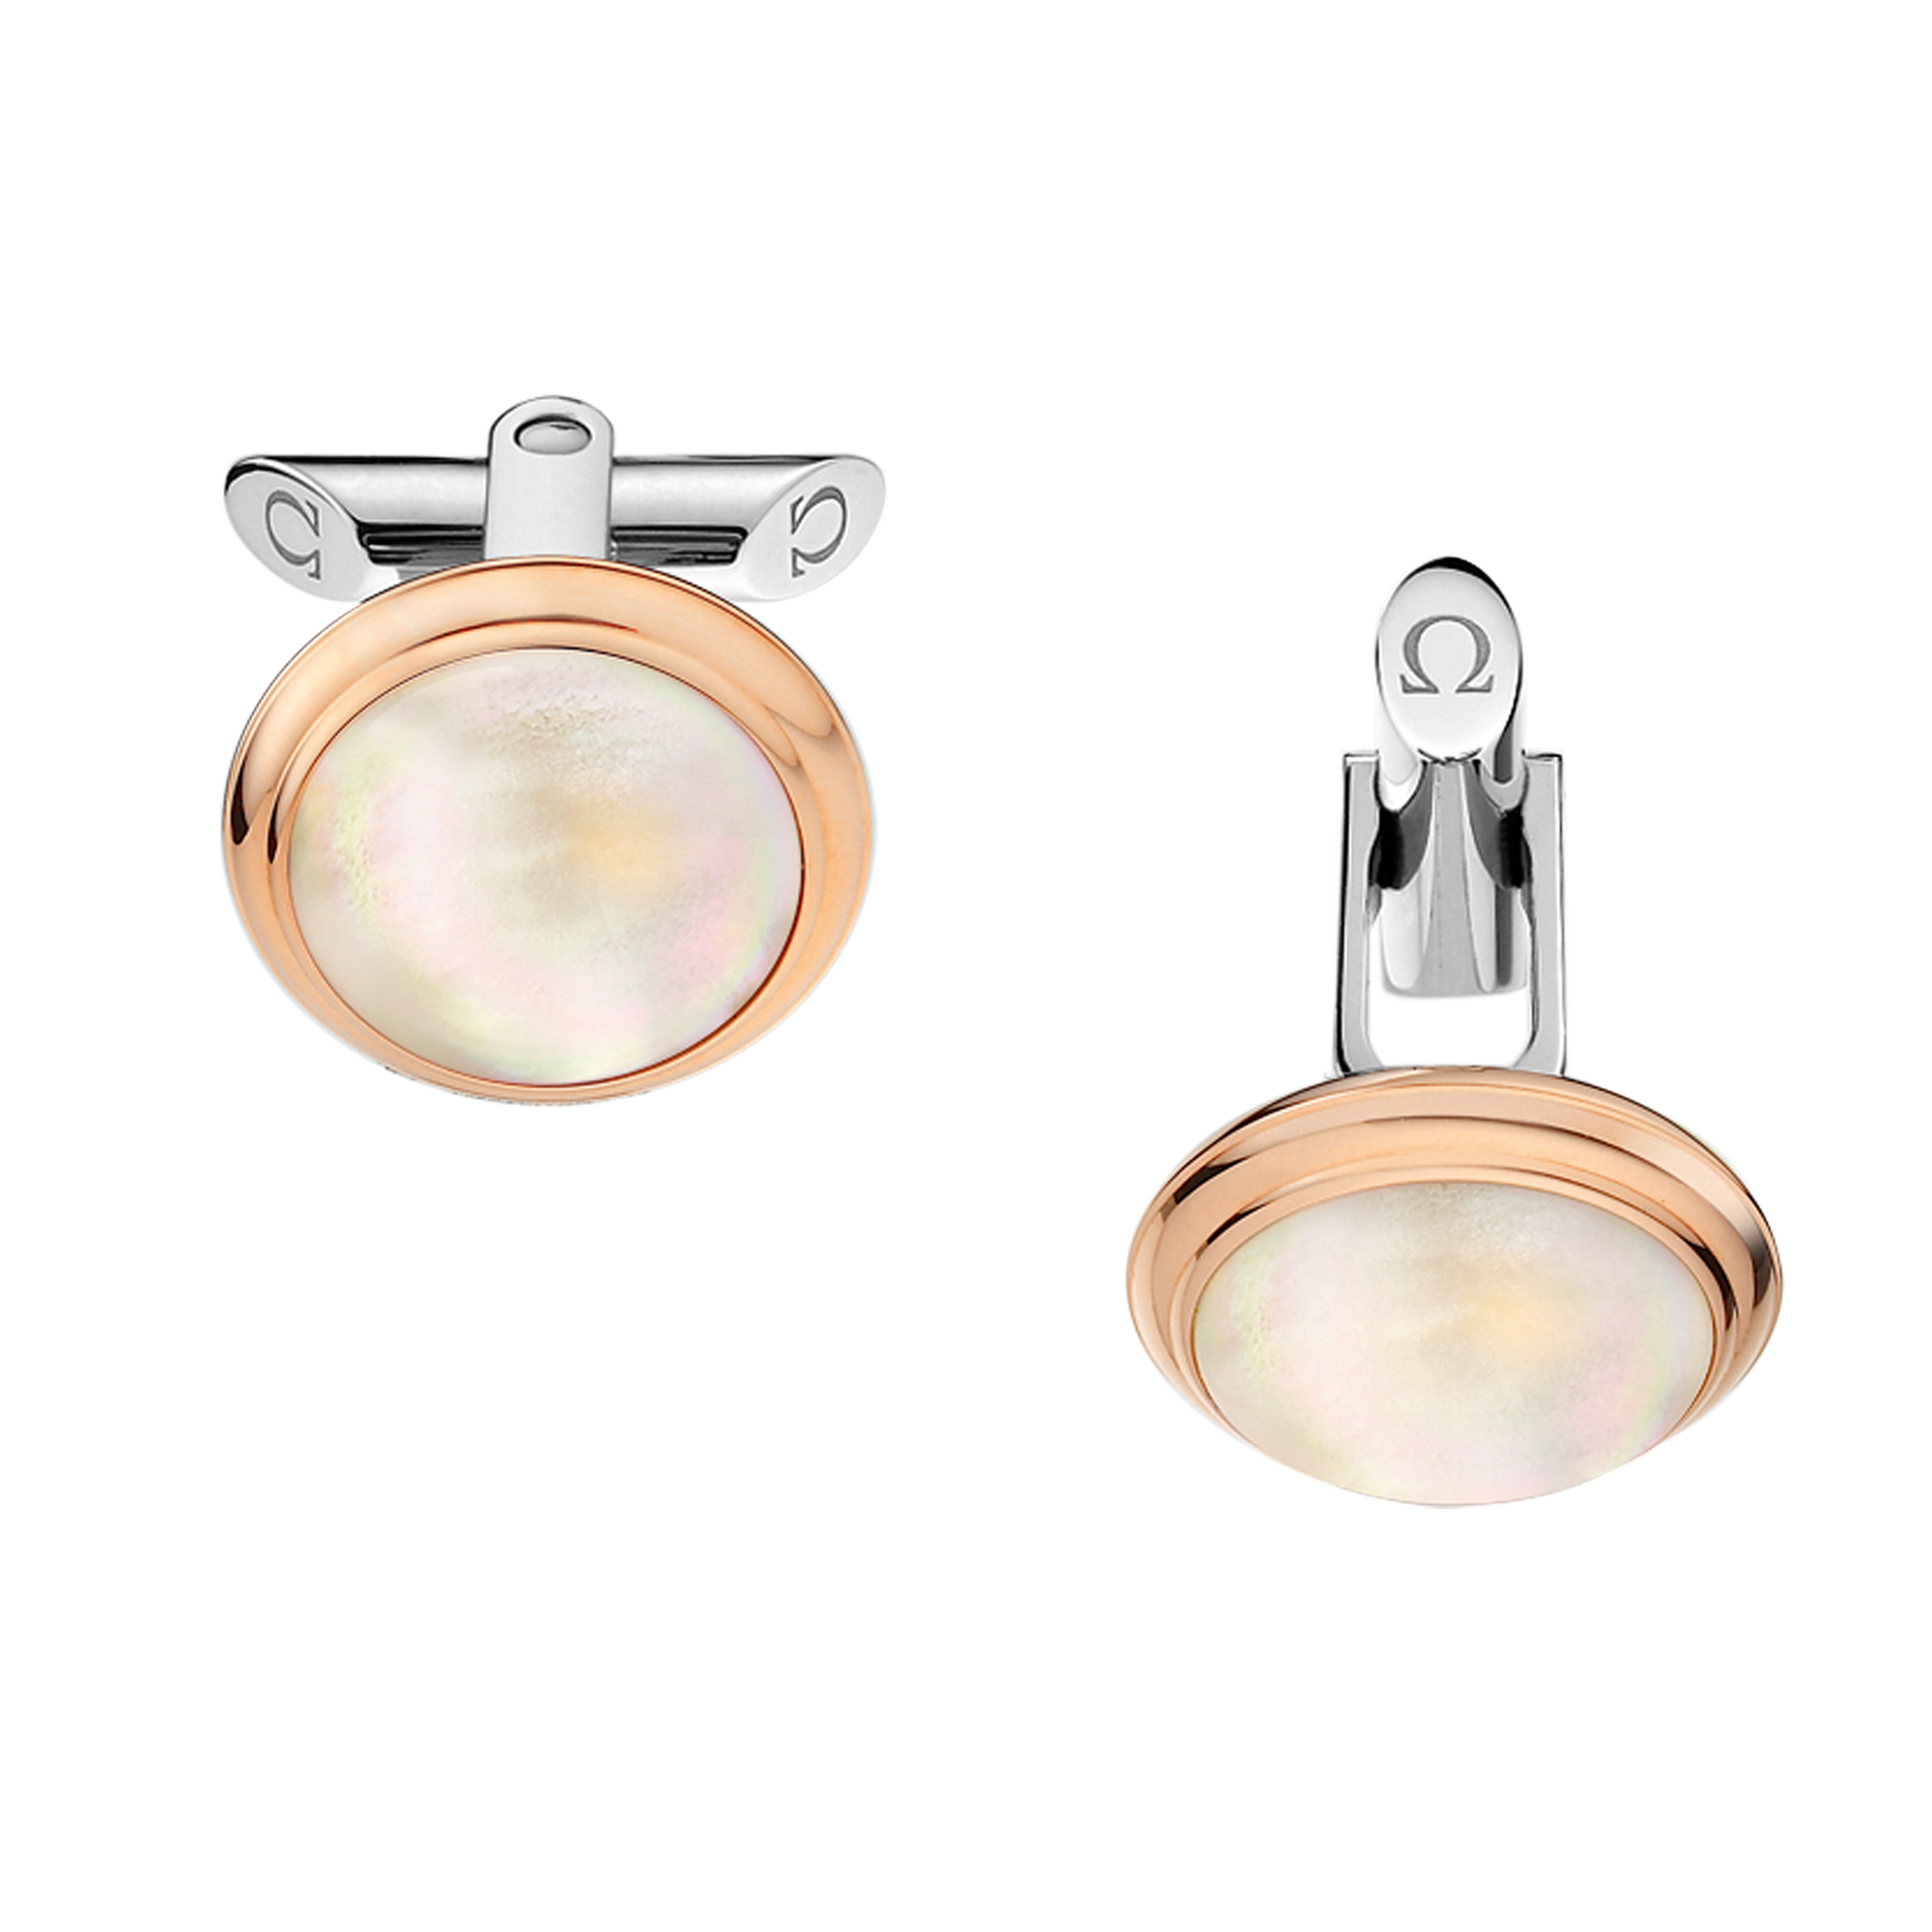 Omegamania Cufflinks, 18K red gold, Stainless steel - C94DGA0204005